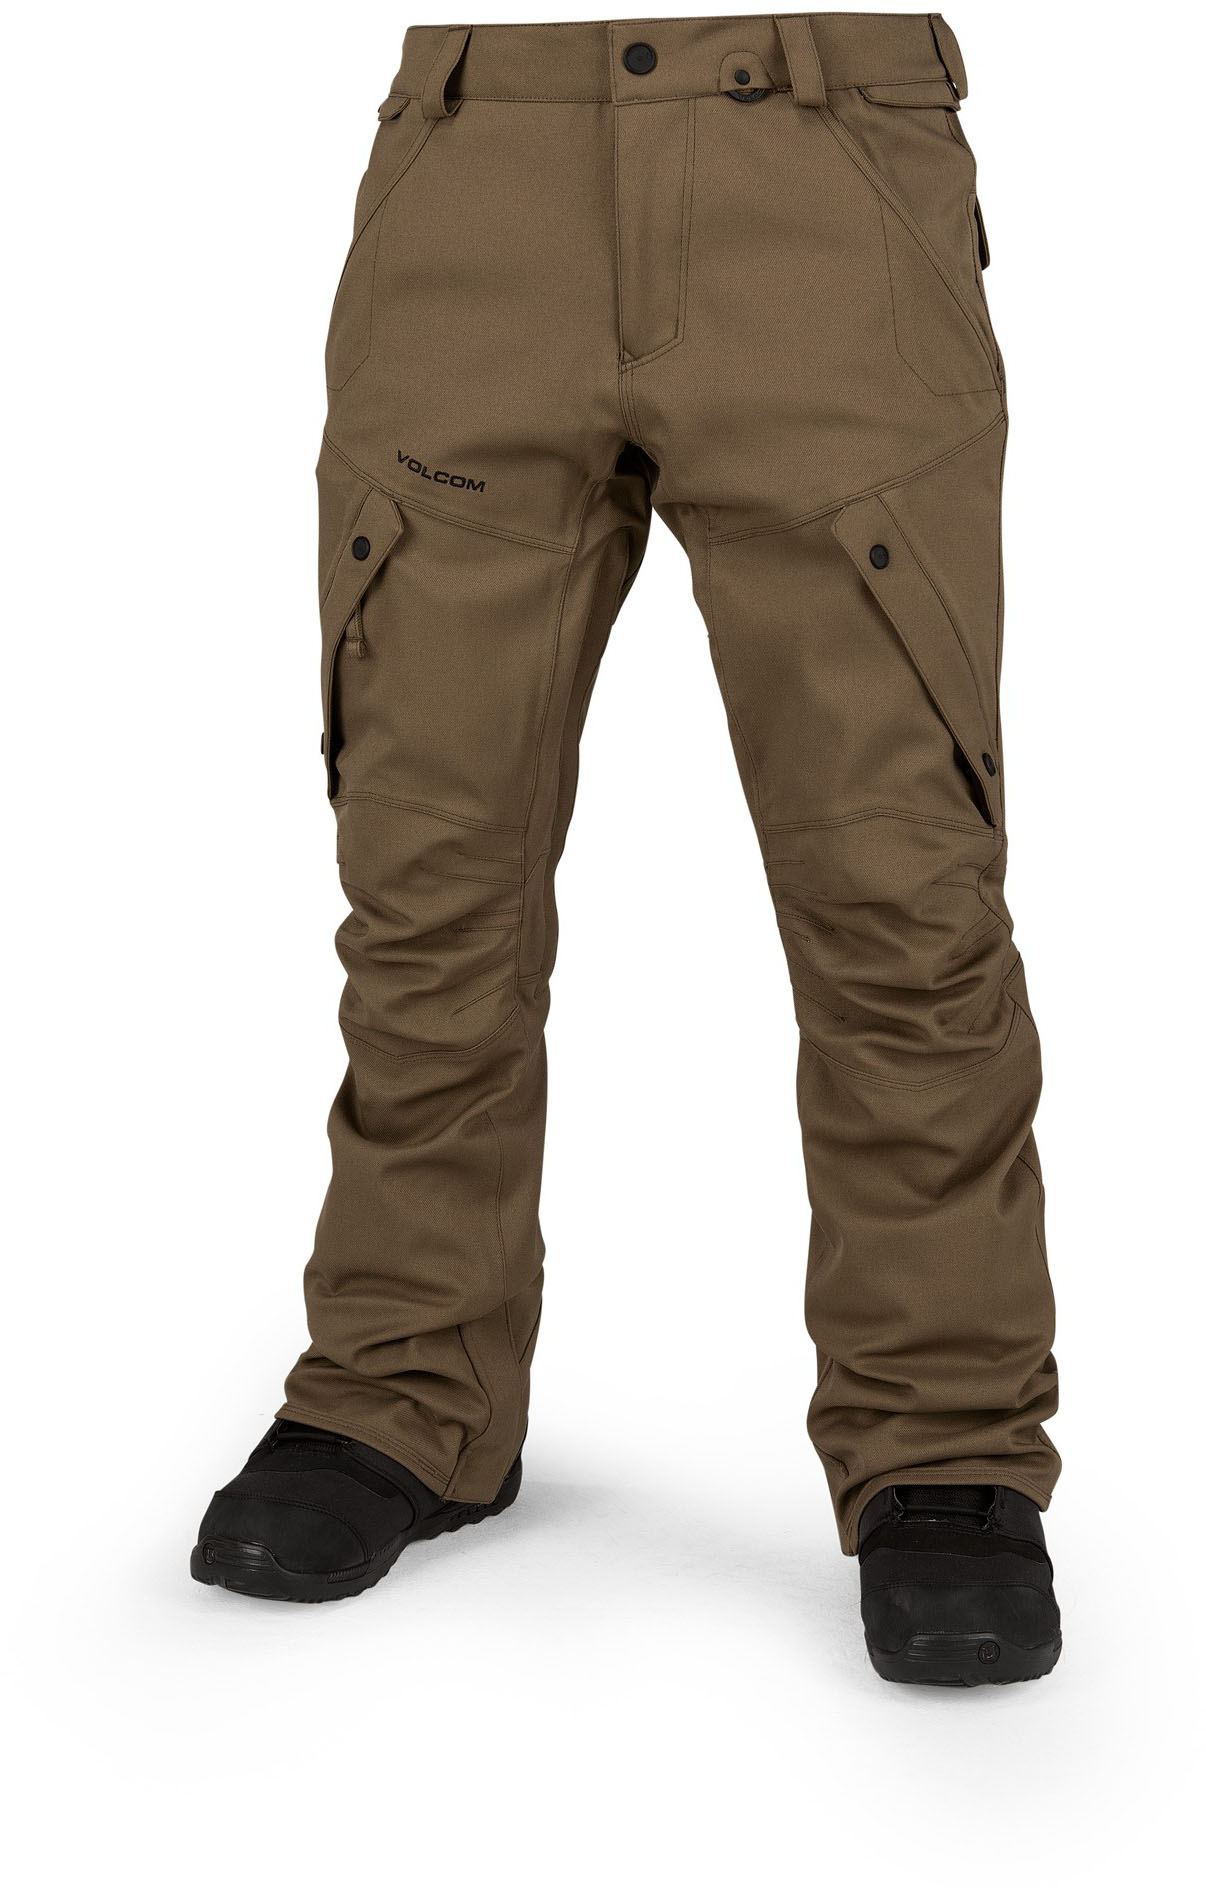 Volcom Articulated Snowboard Pant Review - The Good Ride